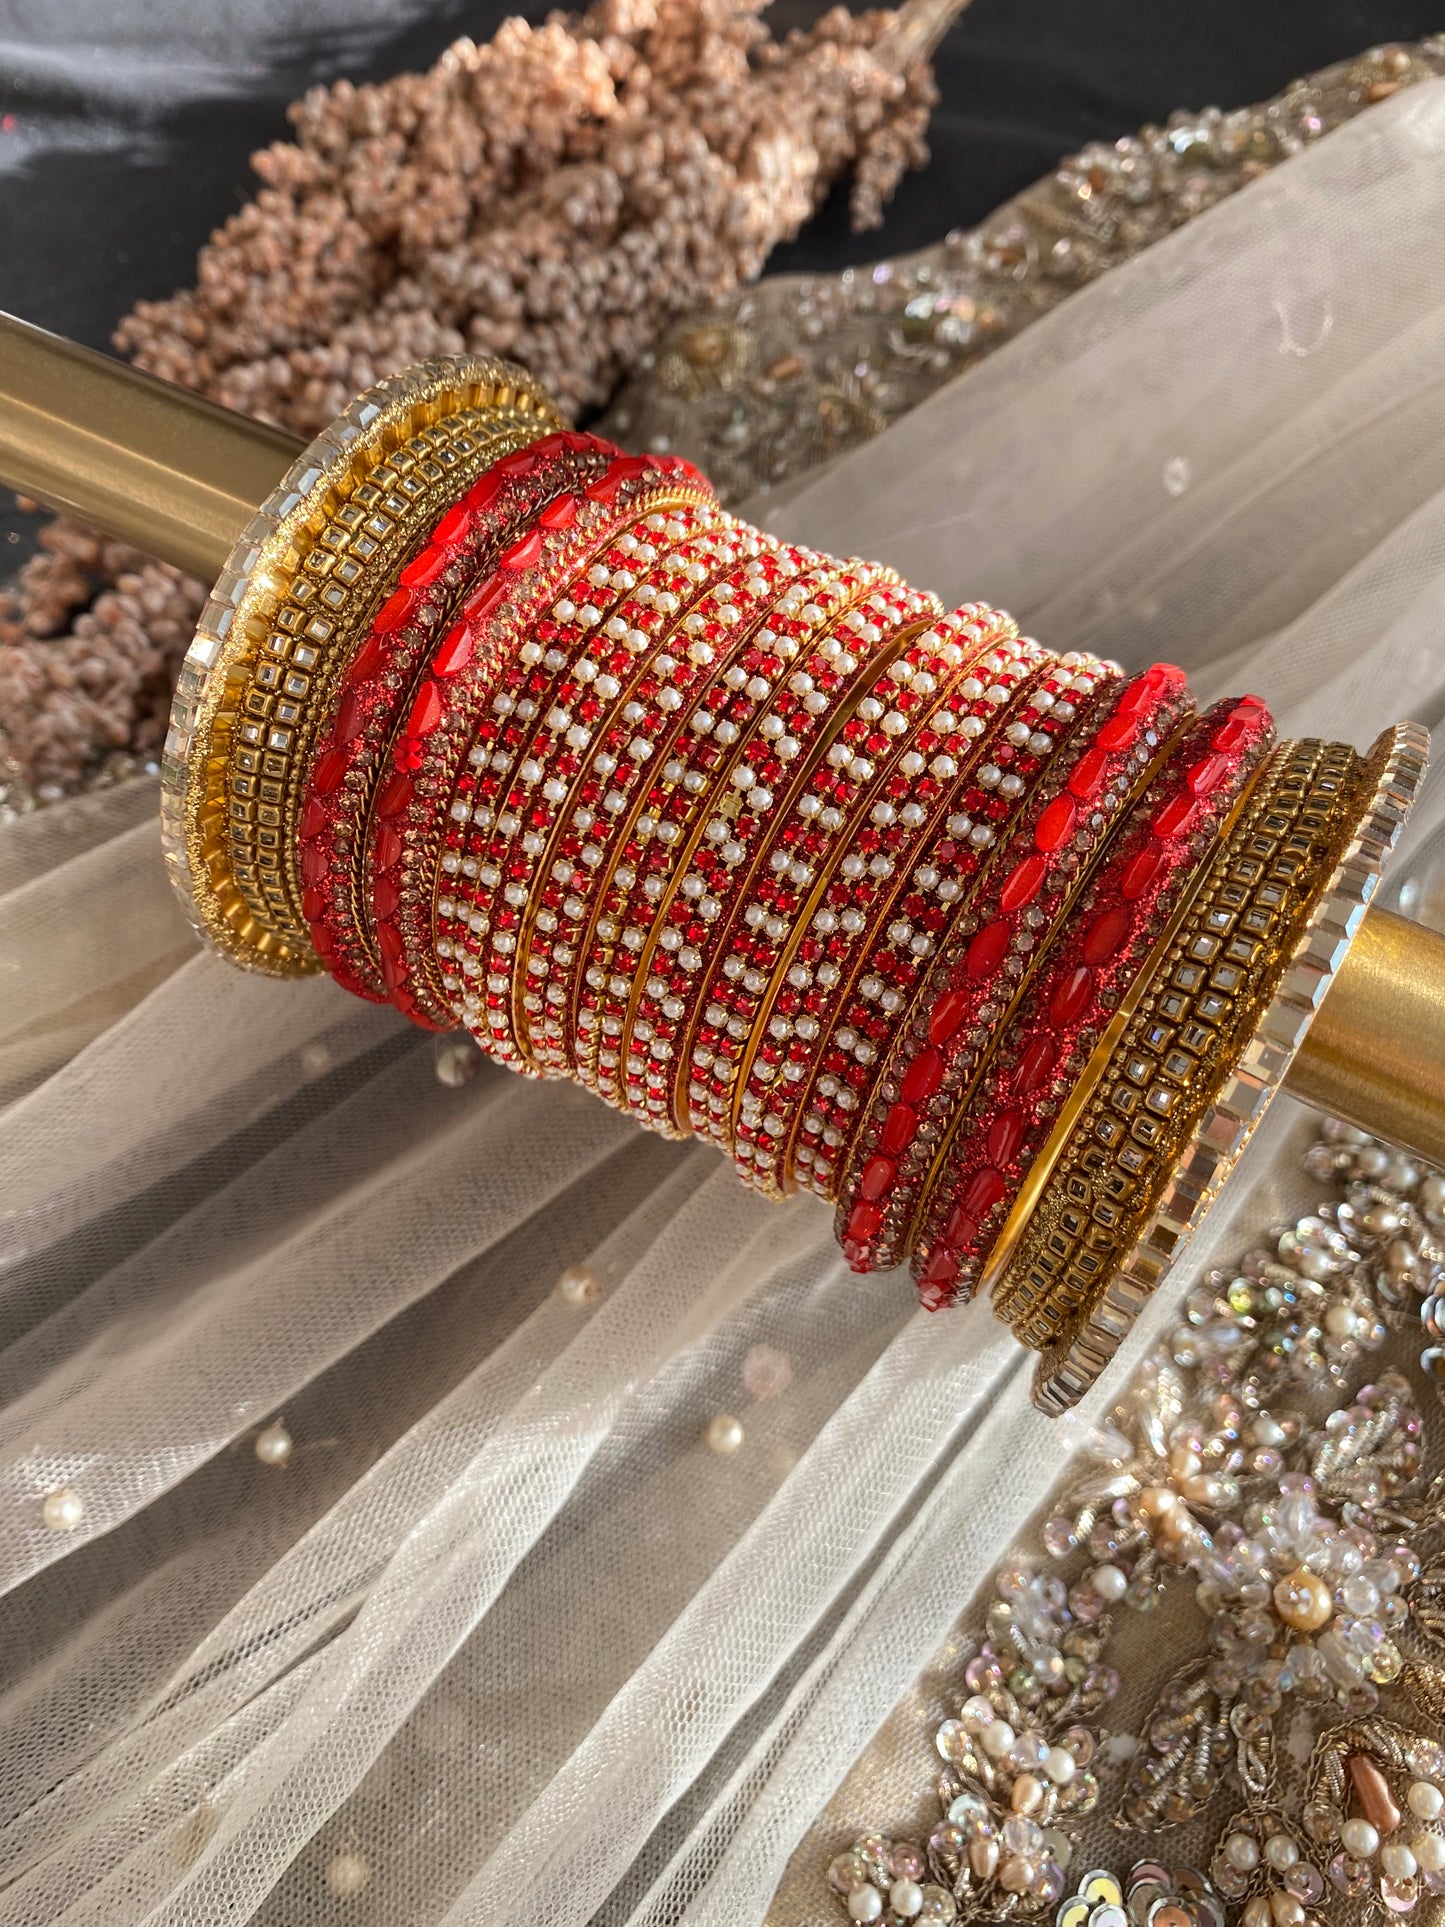 Red/gold bangles